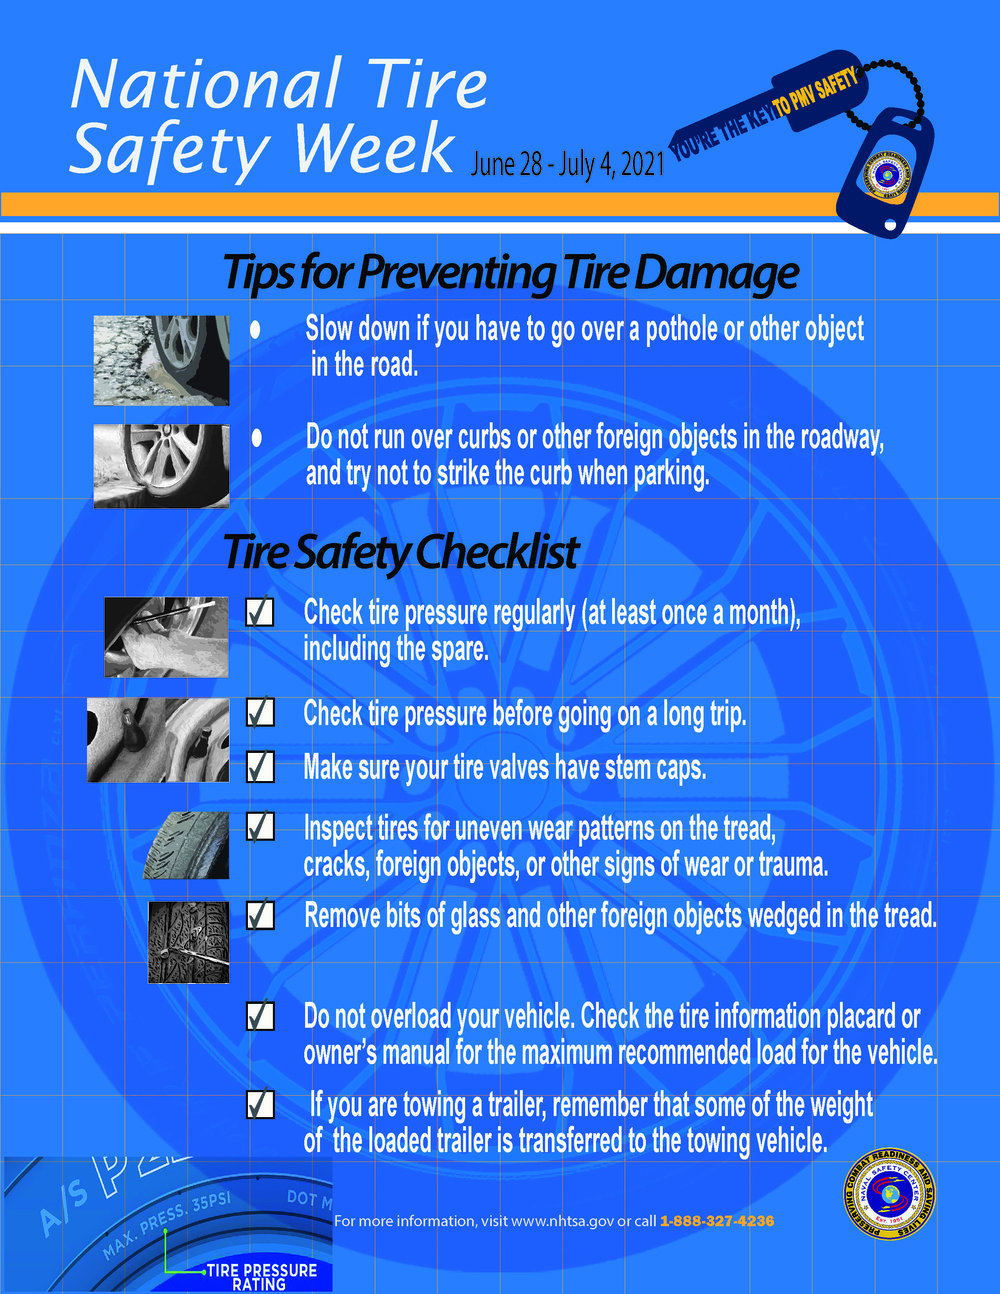 National Tire Safety Week - Tips for Preventing Tire Damage